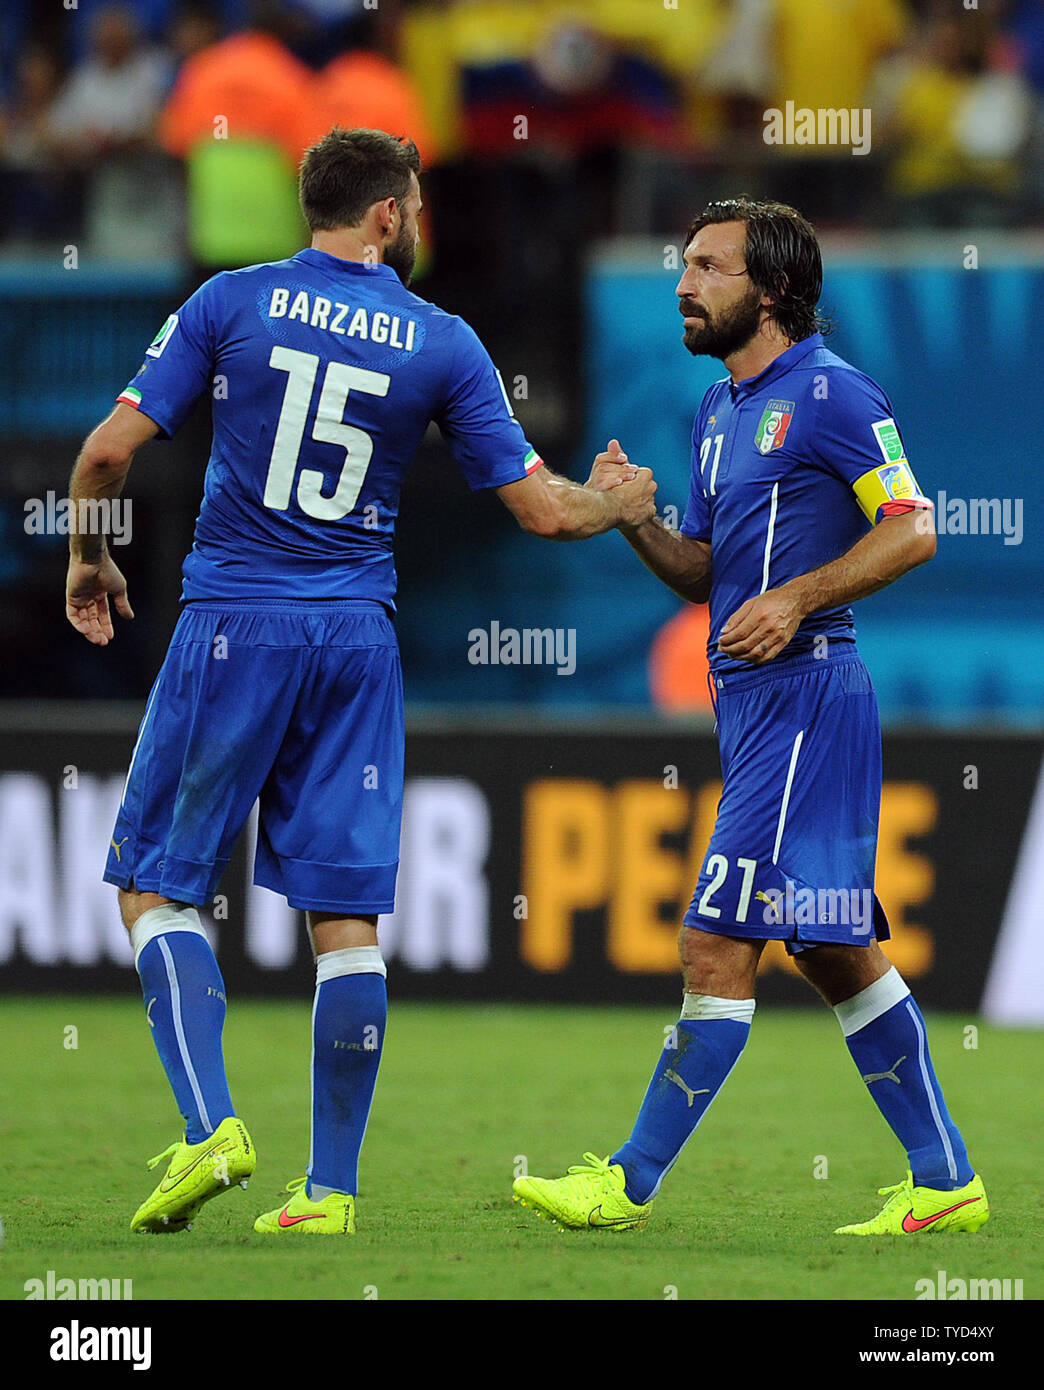 Andrea Pirlo of Italy is congratulated by team-mate Andrea Barzagli at full-time following the 2014 FIFA World Cup Group D match at the Arena Amazonia in Manaus, Brazil on June 14, 2014. UPI/Chris Brunskill Stock Photo